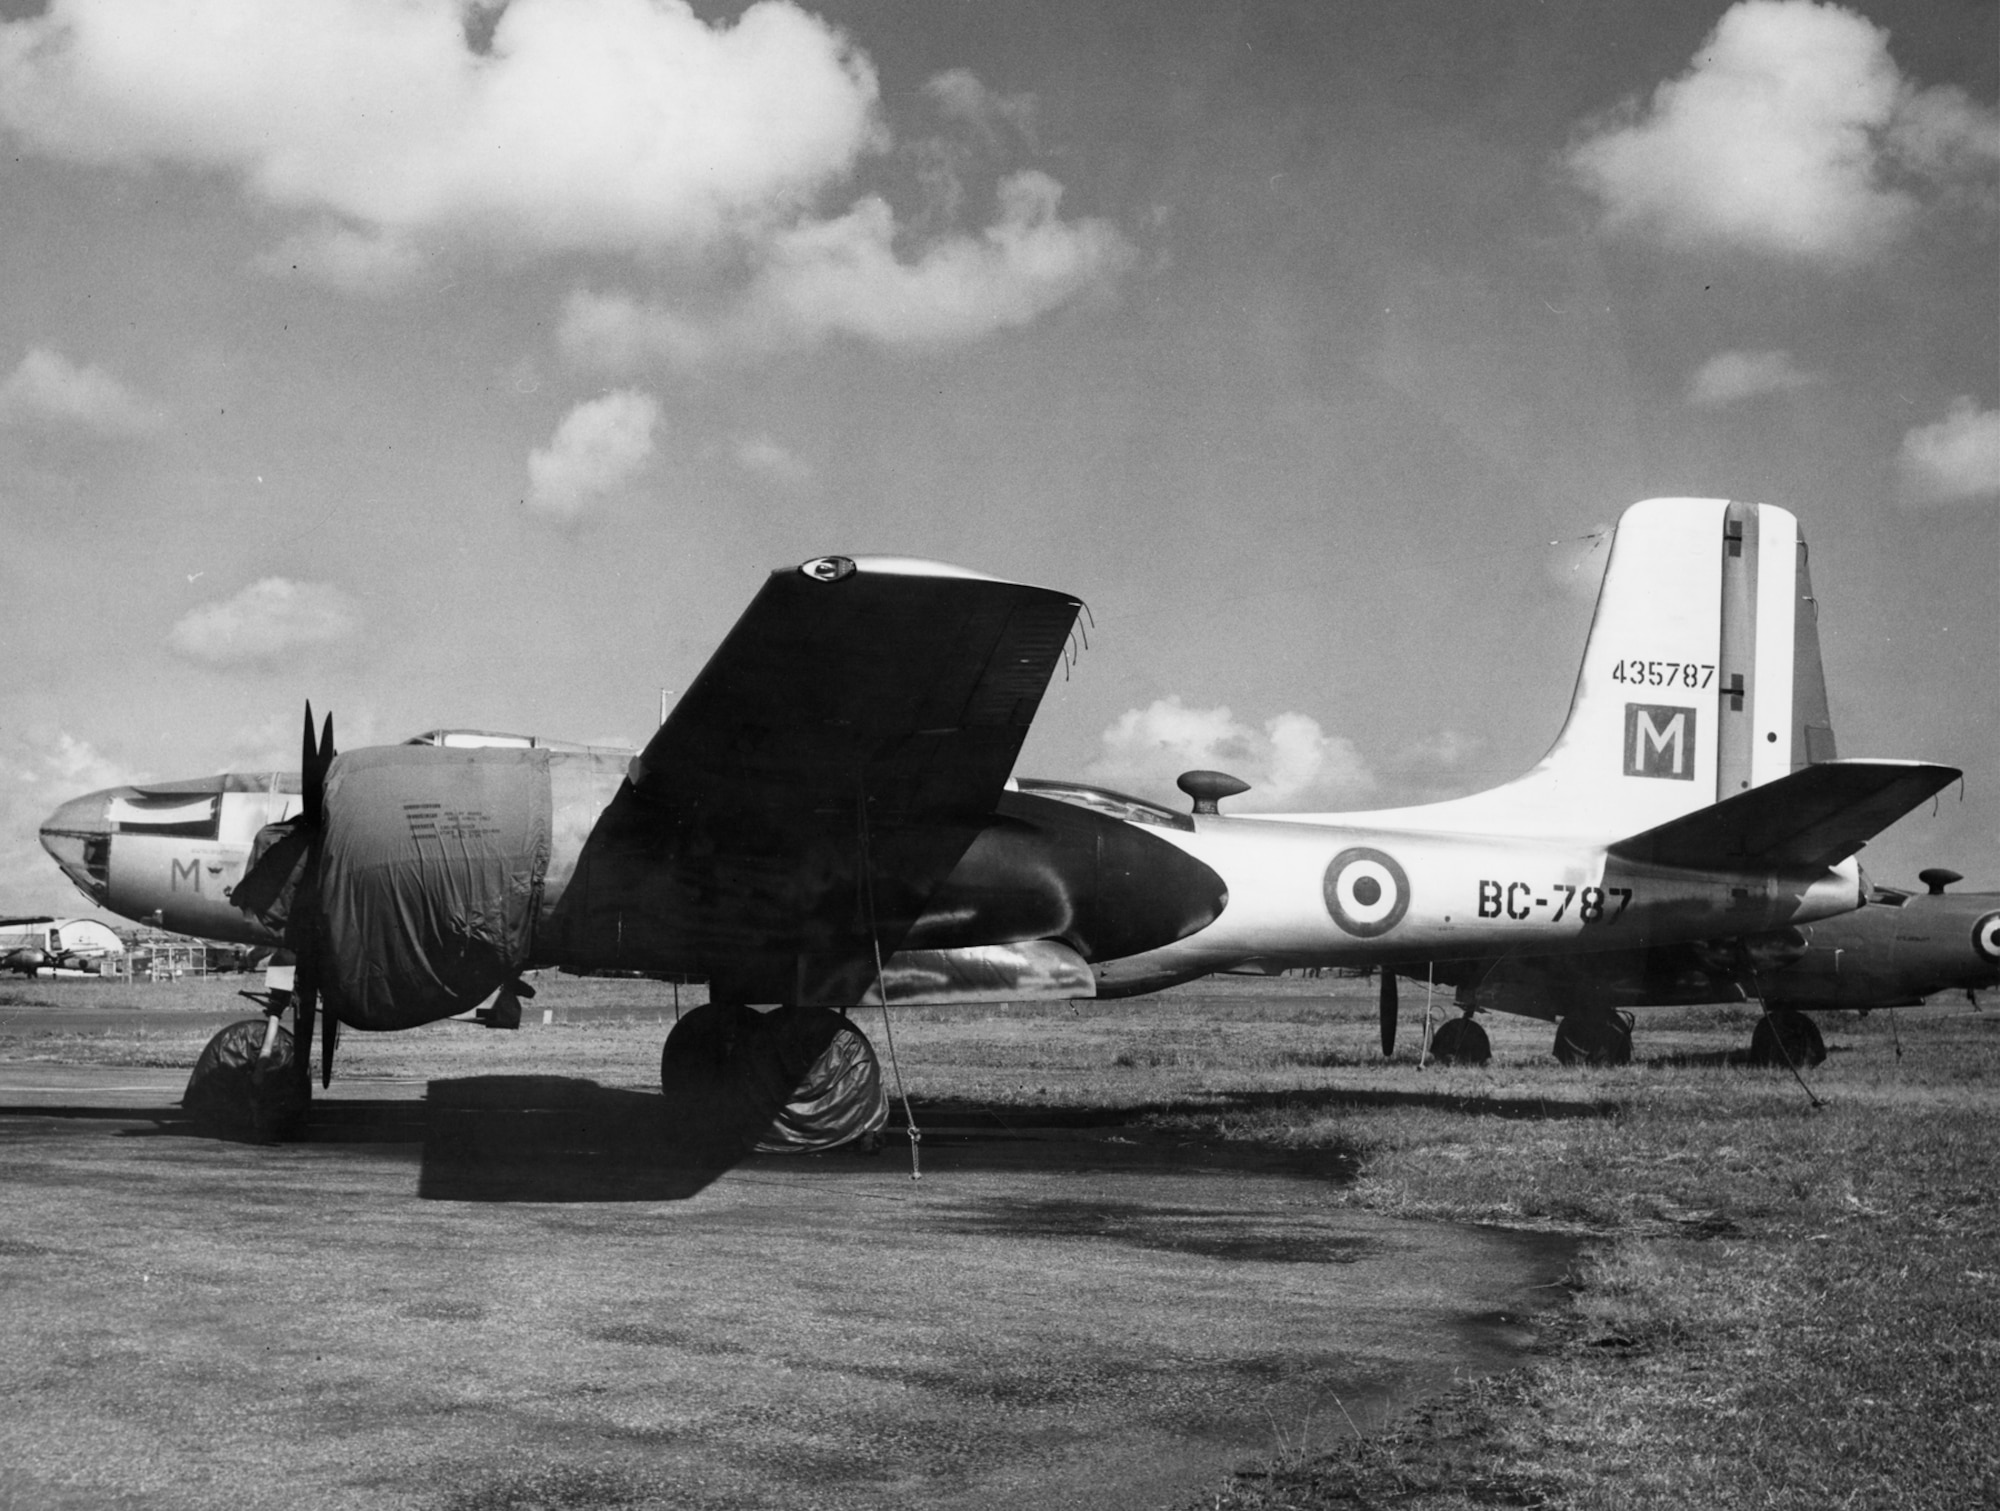 From 1950-1954, the USAF loaned transport and attack aircraft to the French air force in Indochina. The USAF also sent about 200 aircraft mechanics to help maintain them. This aircraft is in French markings. (U.S. Air Force photo)